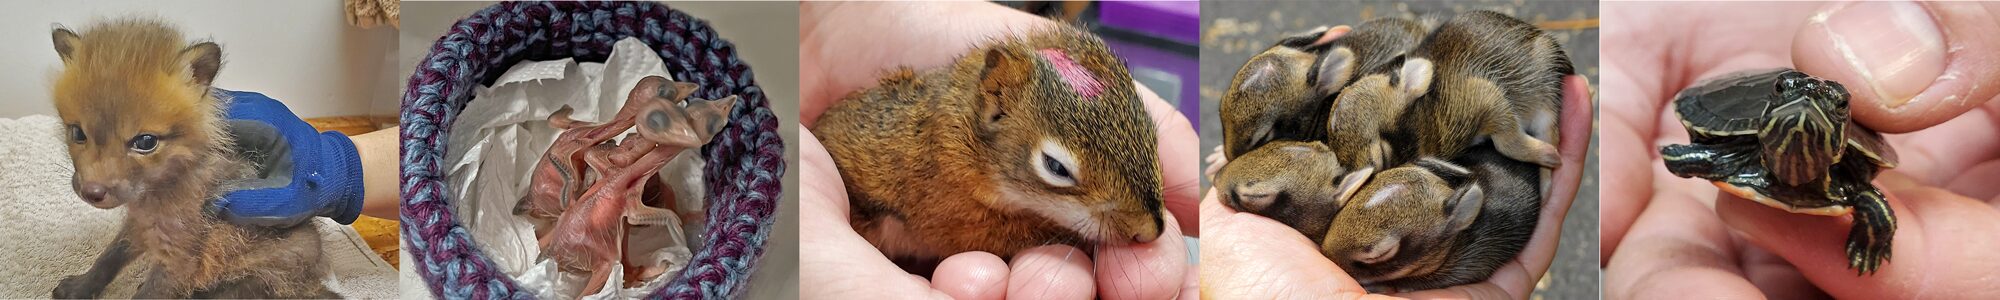 baby animals receiving care at the Northwoods Wildlife Center